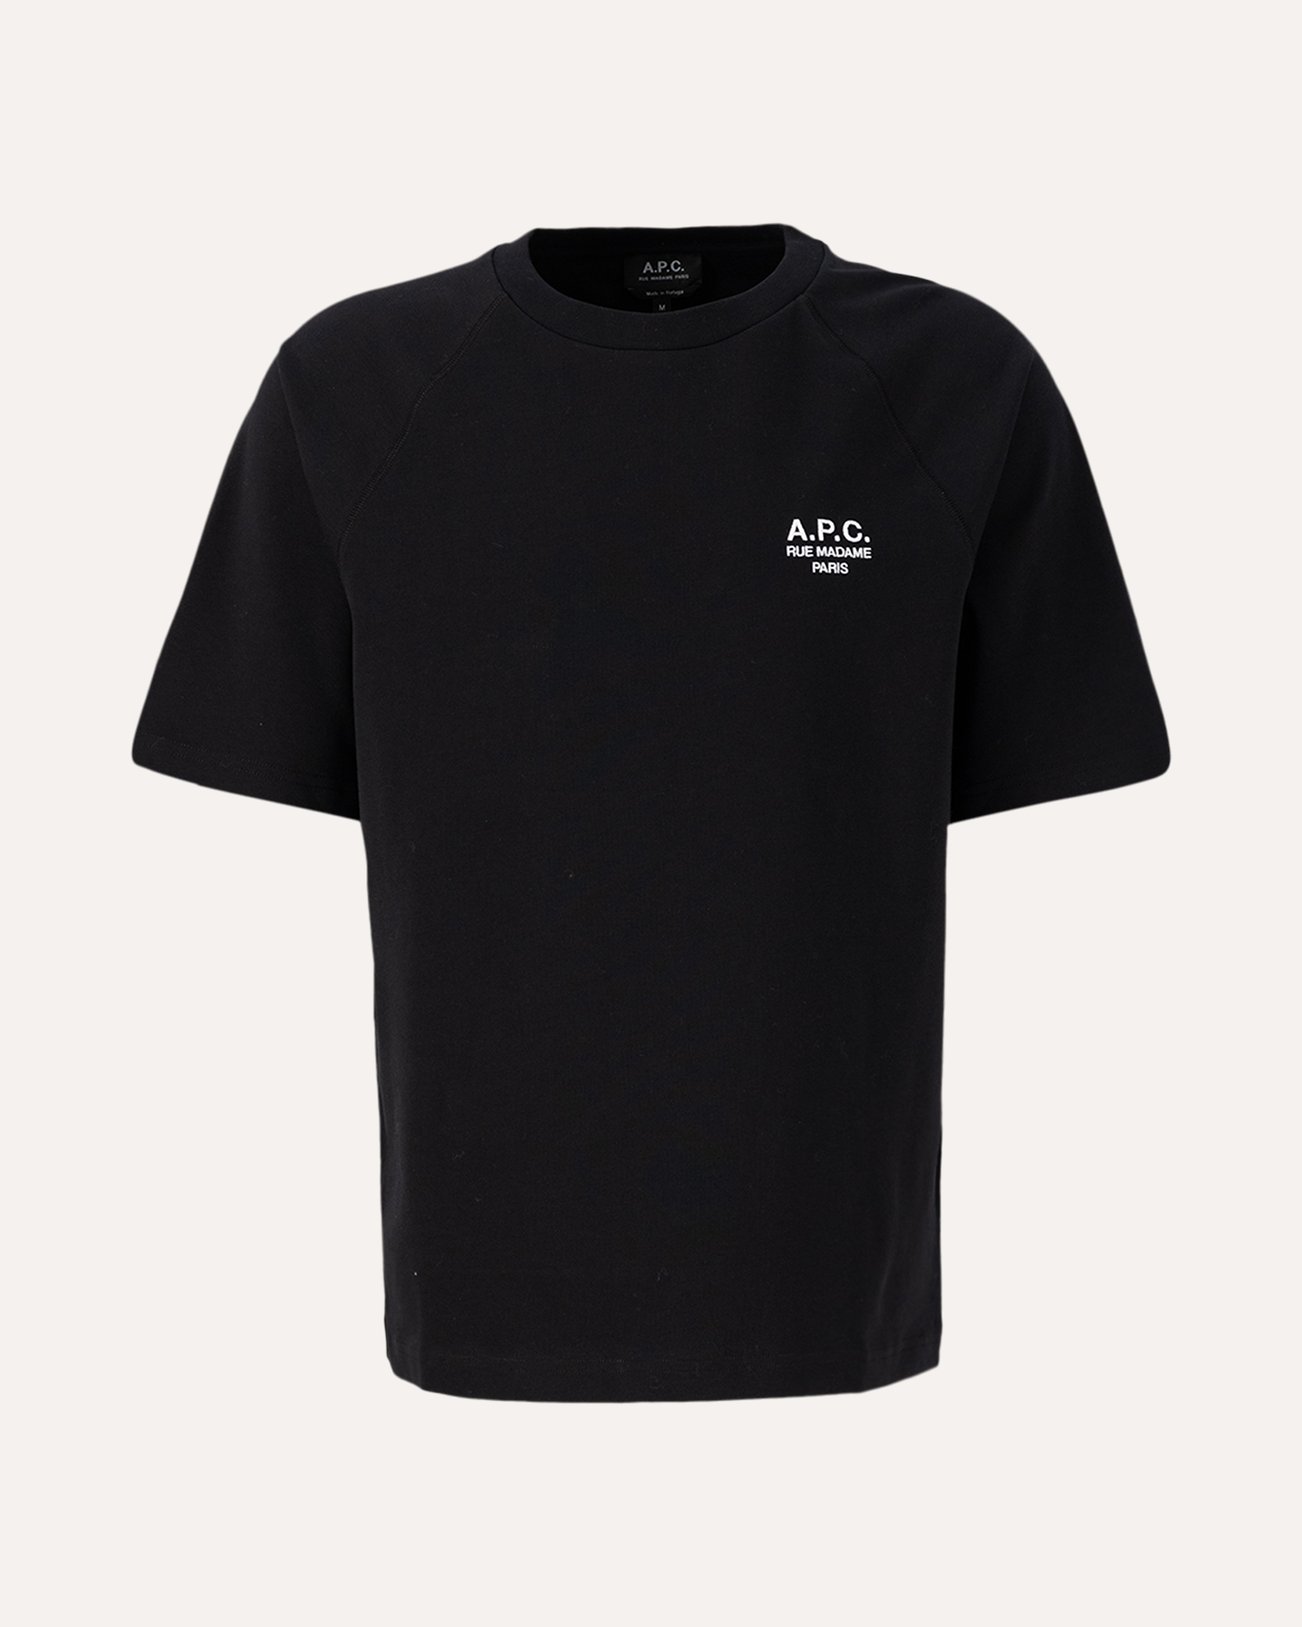 A.P.C. T-Shirt Willy BLACK 1